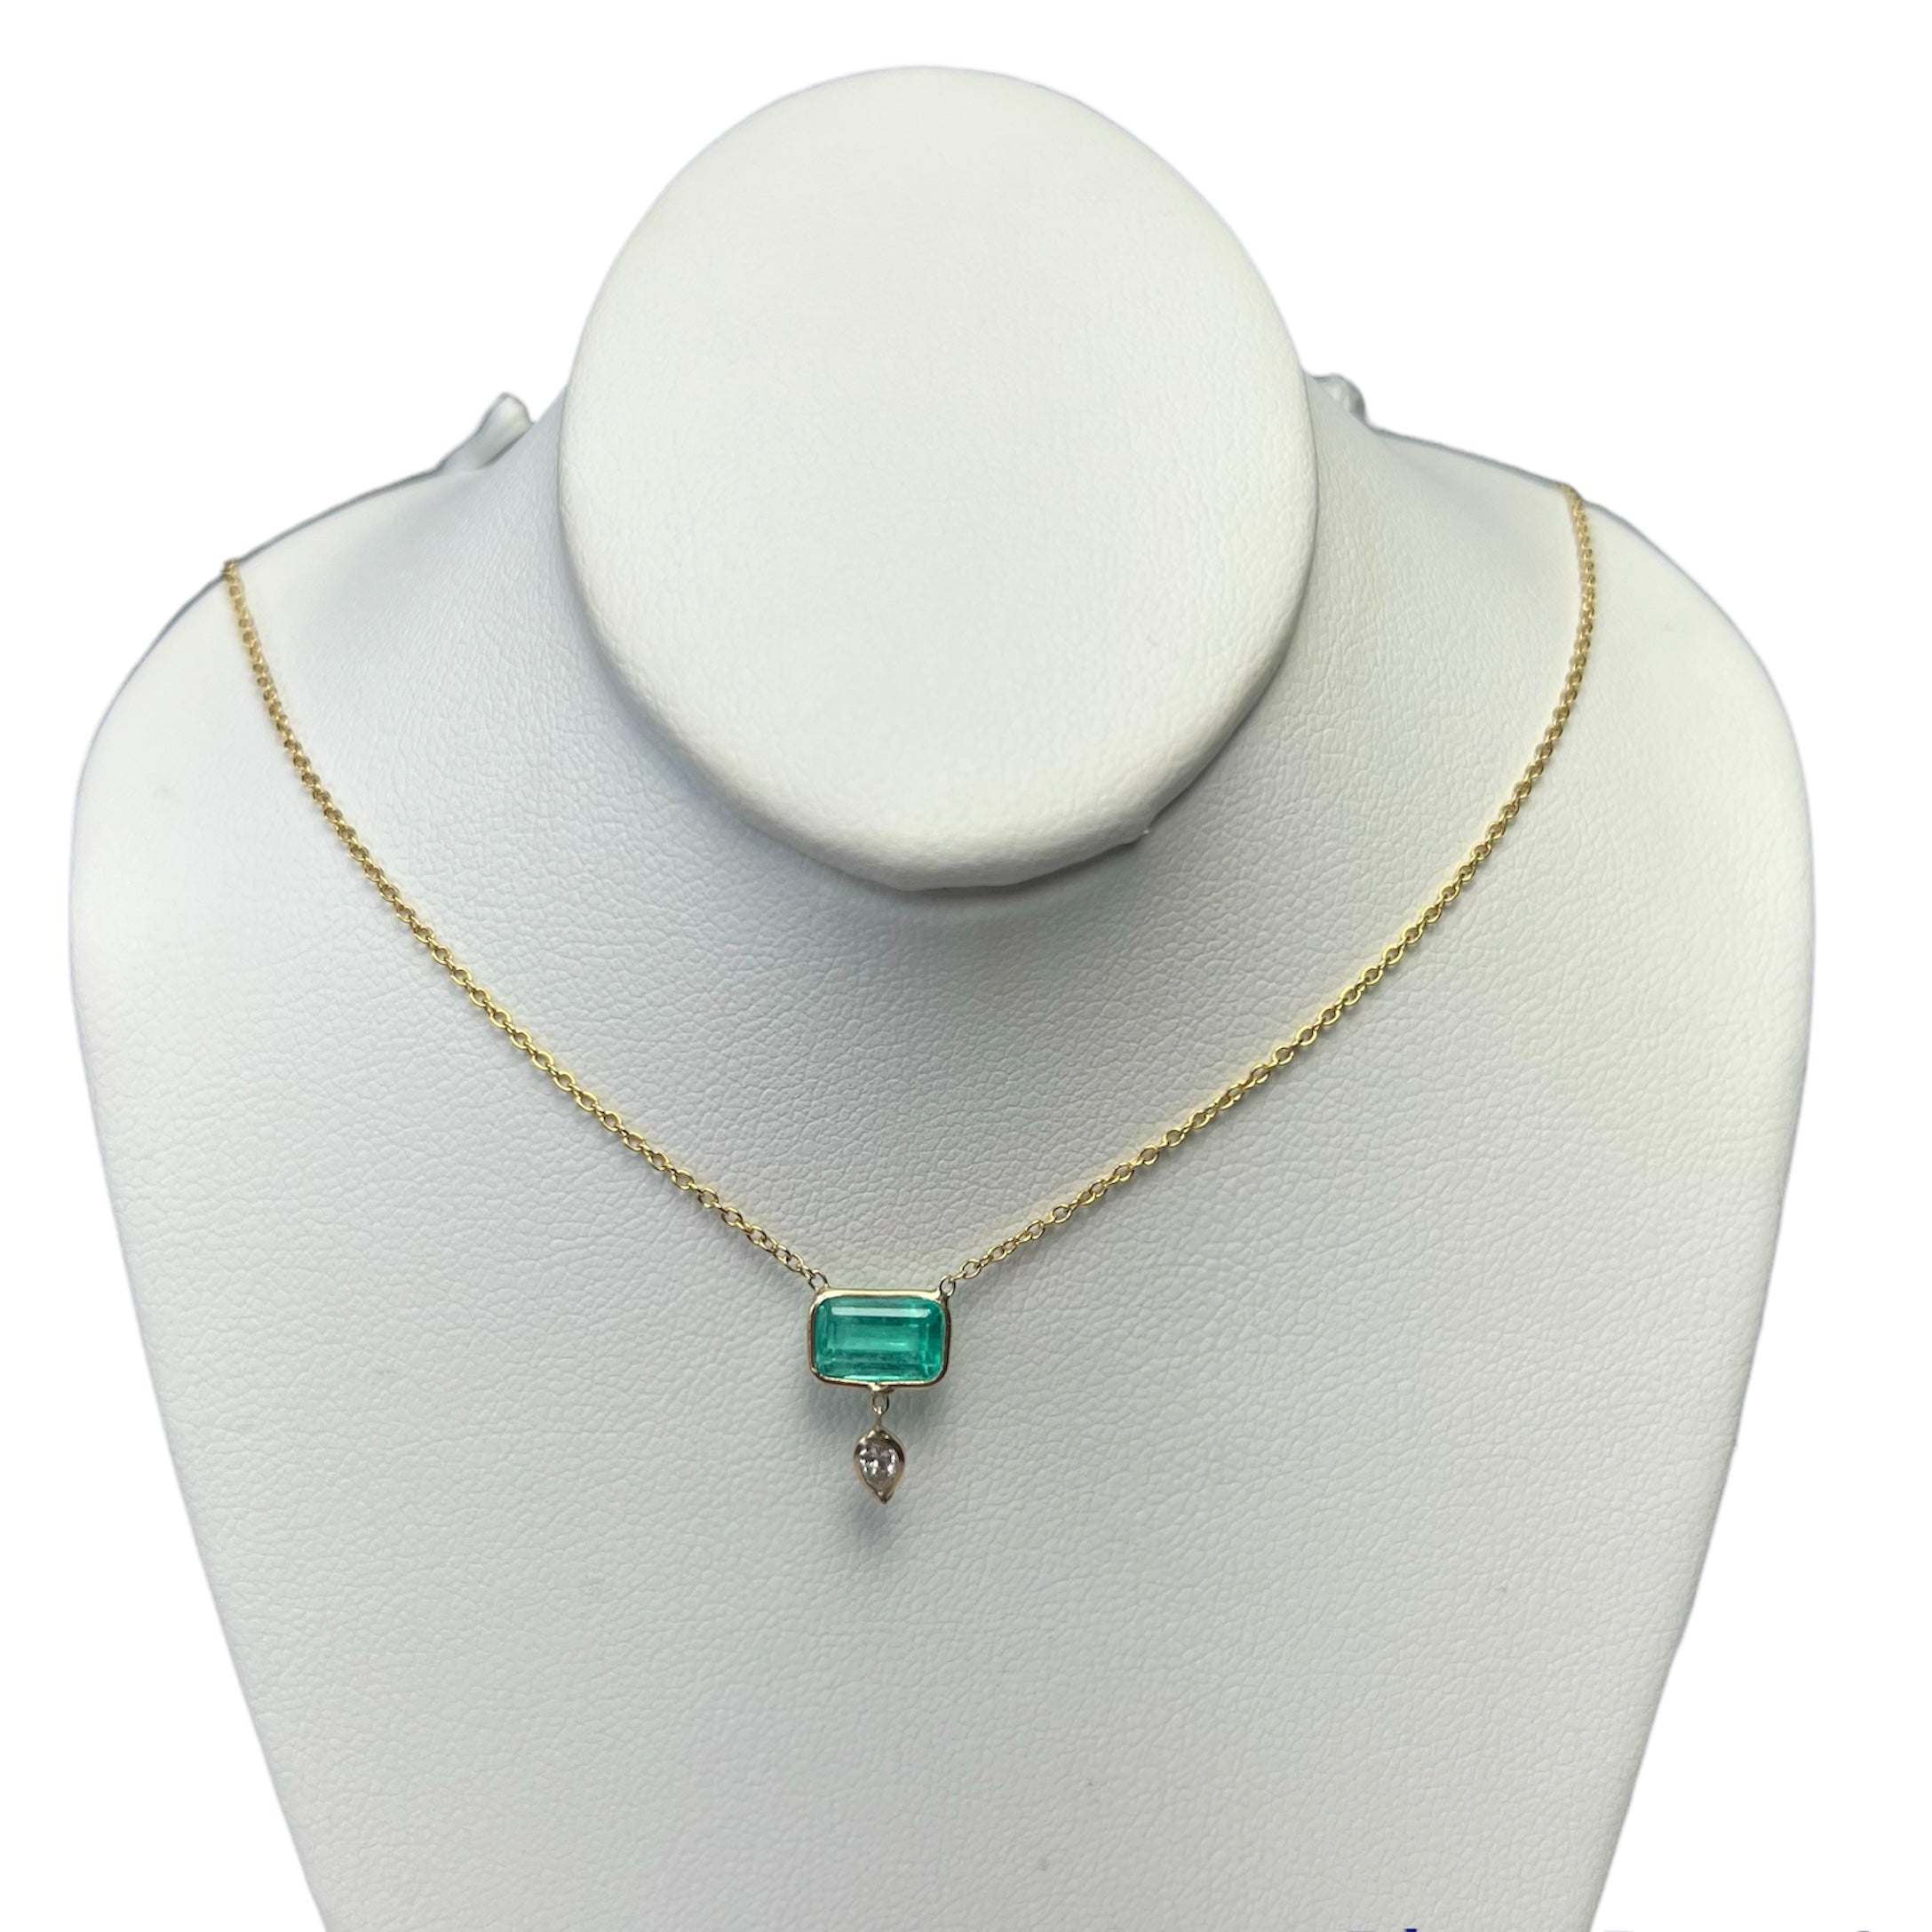 Emerald and Diamond 16" 14K Yellow Gold Cable Chain Necklace